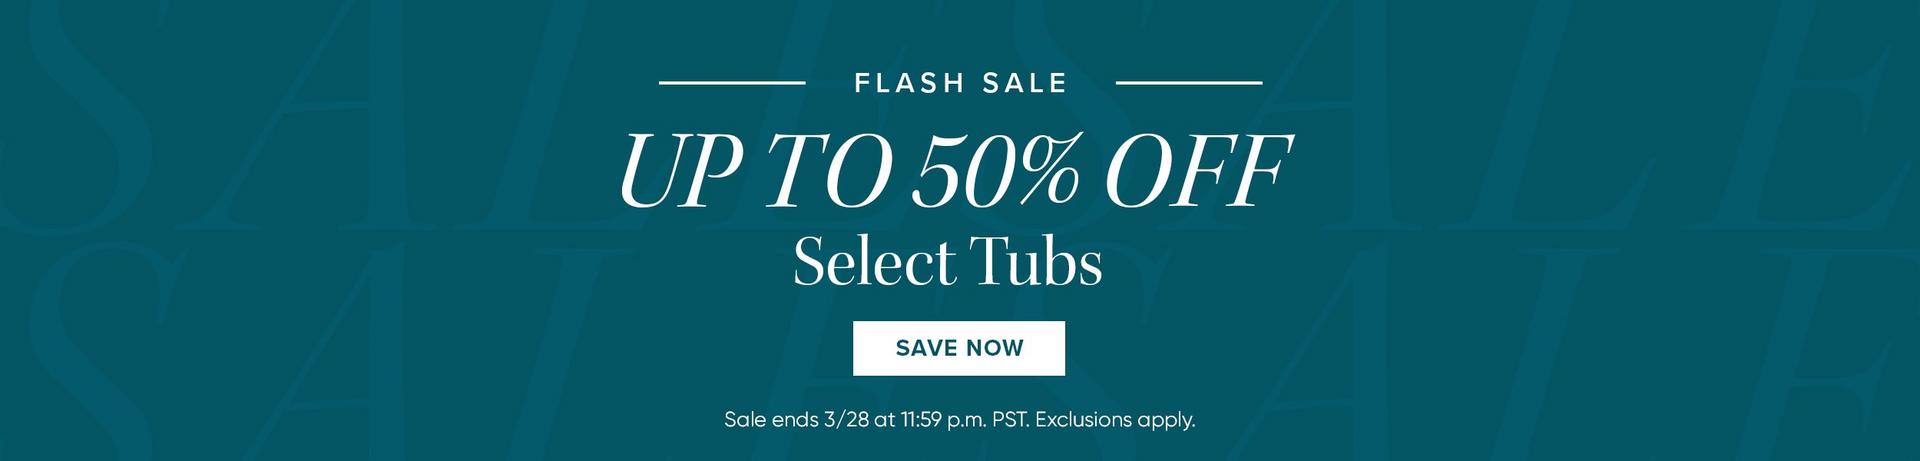 Flash Sale - Up to 50% Off Select Tubs, Save Now